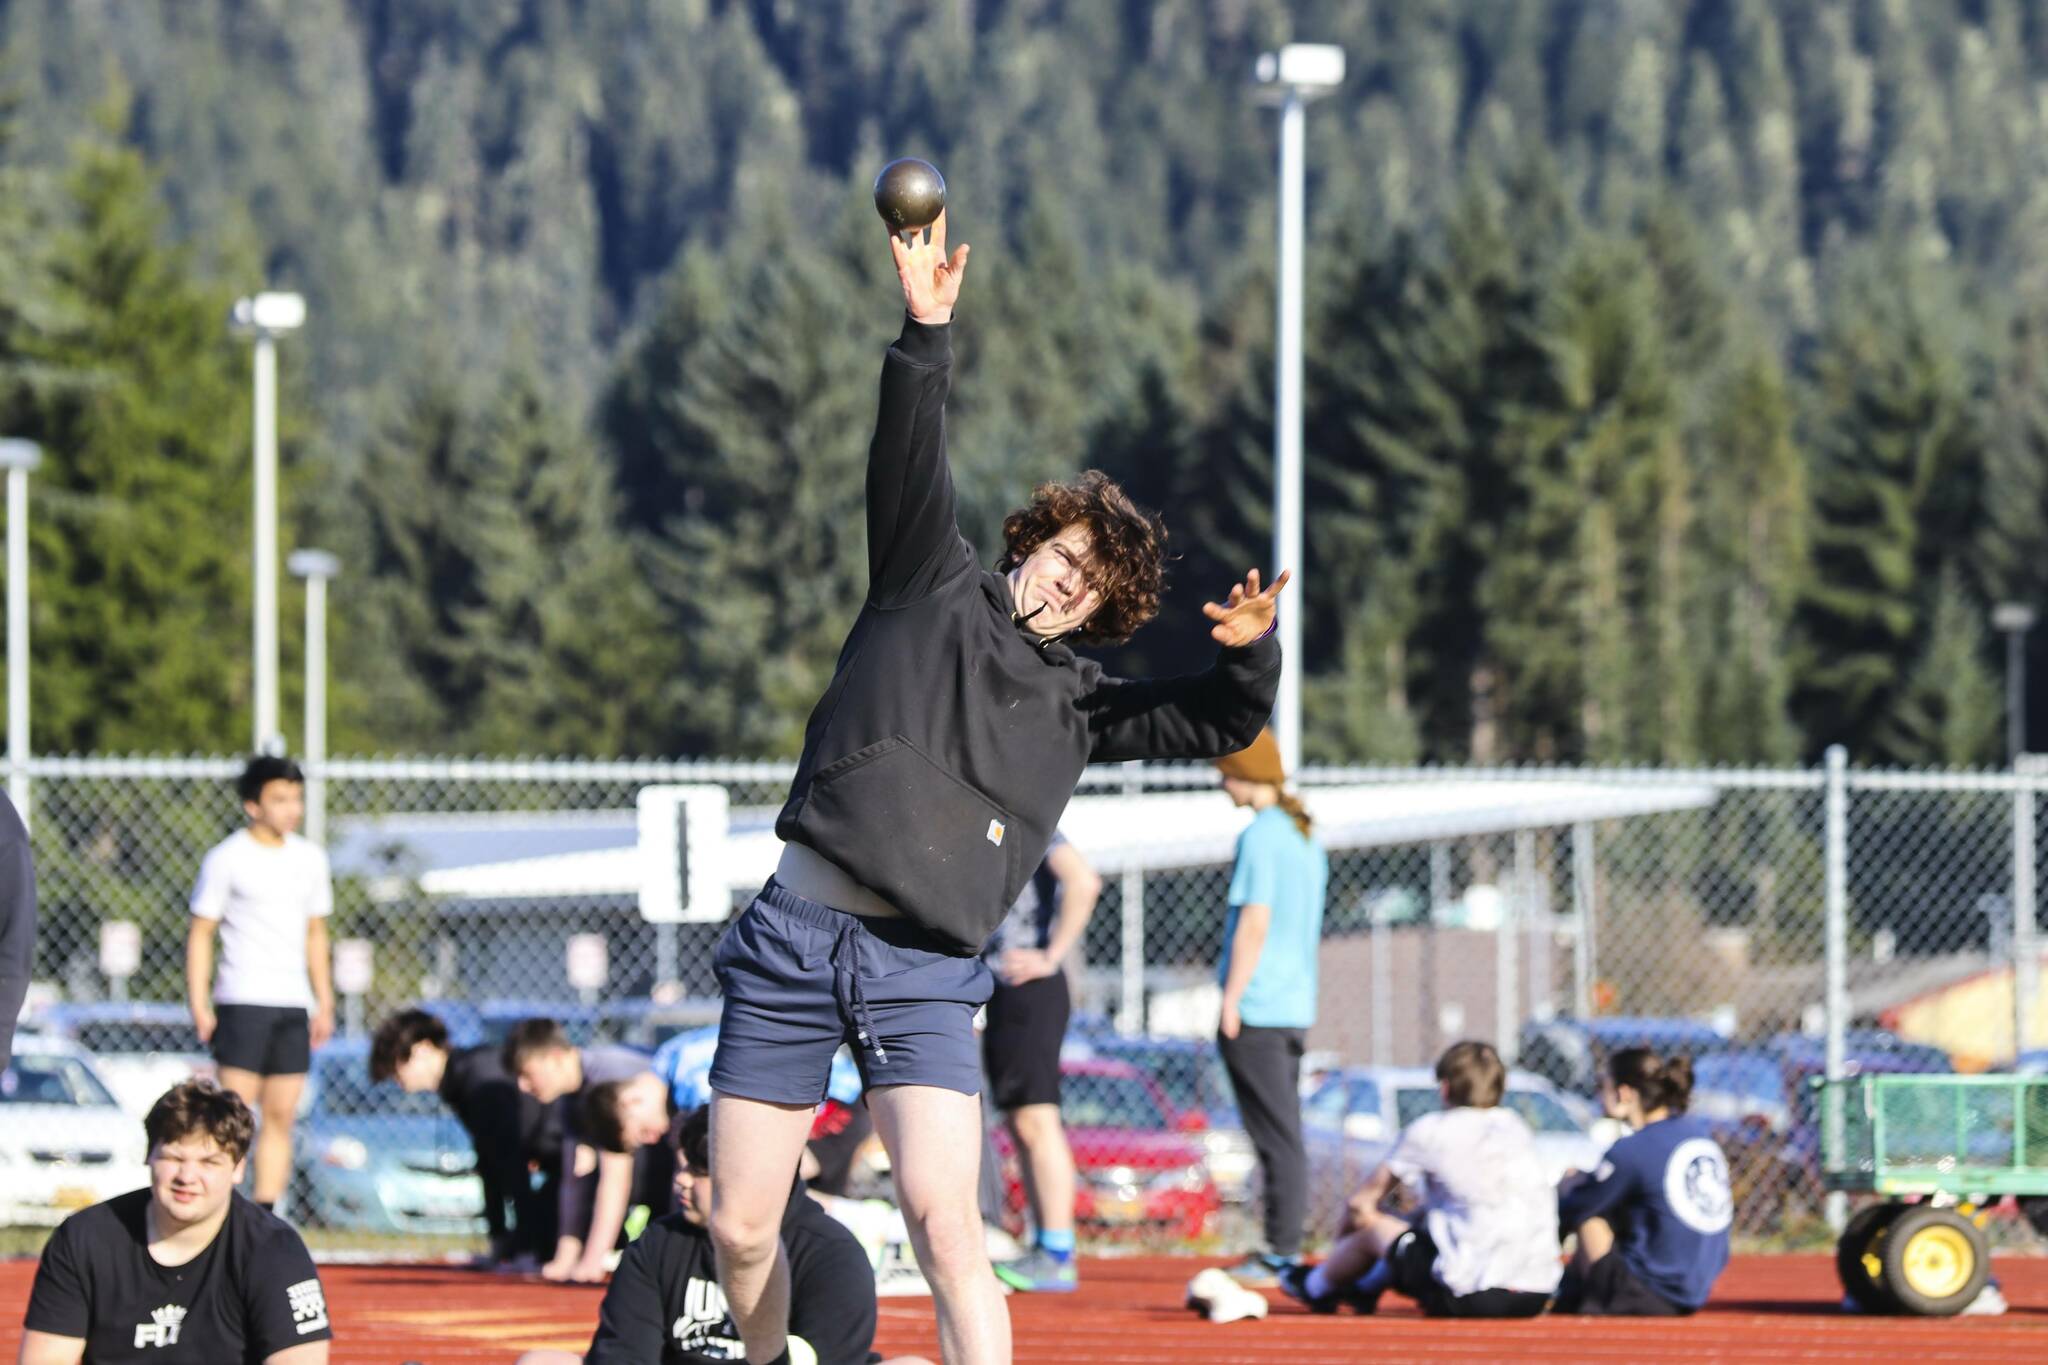 JDHS athlete Robbie Gabel throws the shot put during a practice at TMHS on April 14, 2022. (Michael S. Lockett / Juneau Empire)